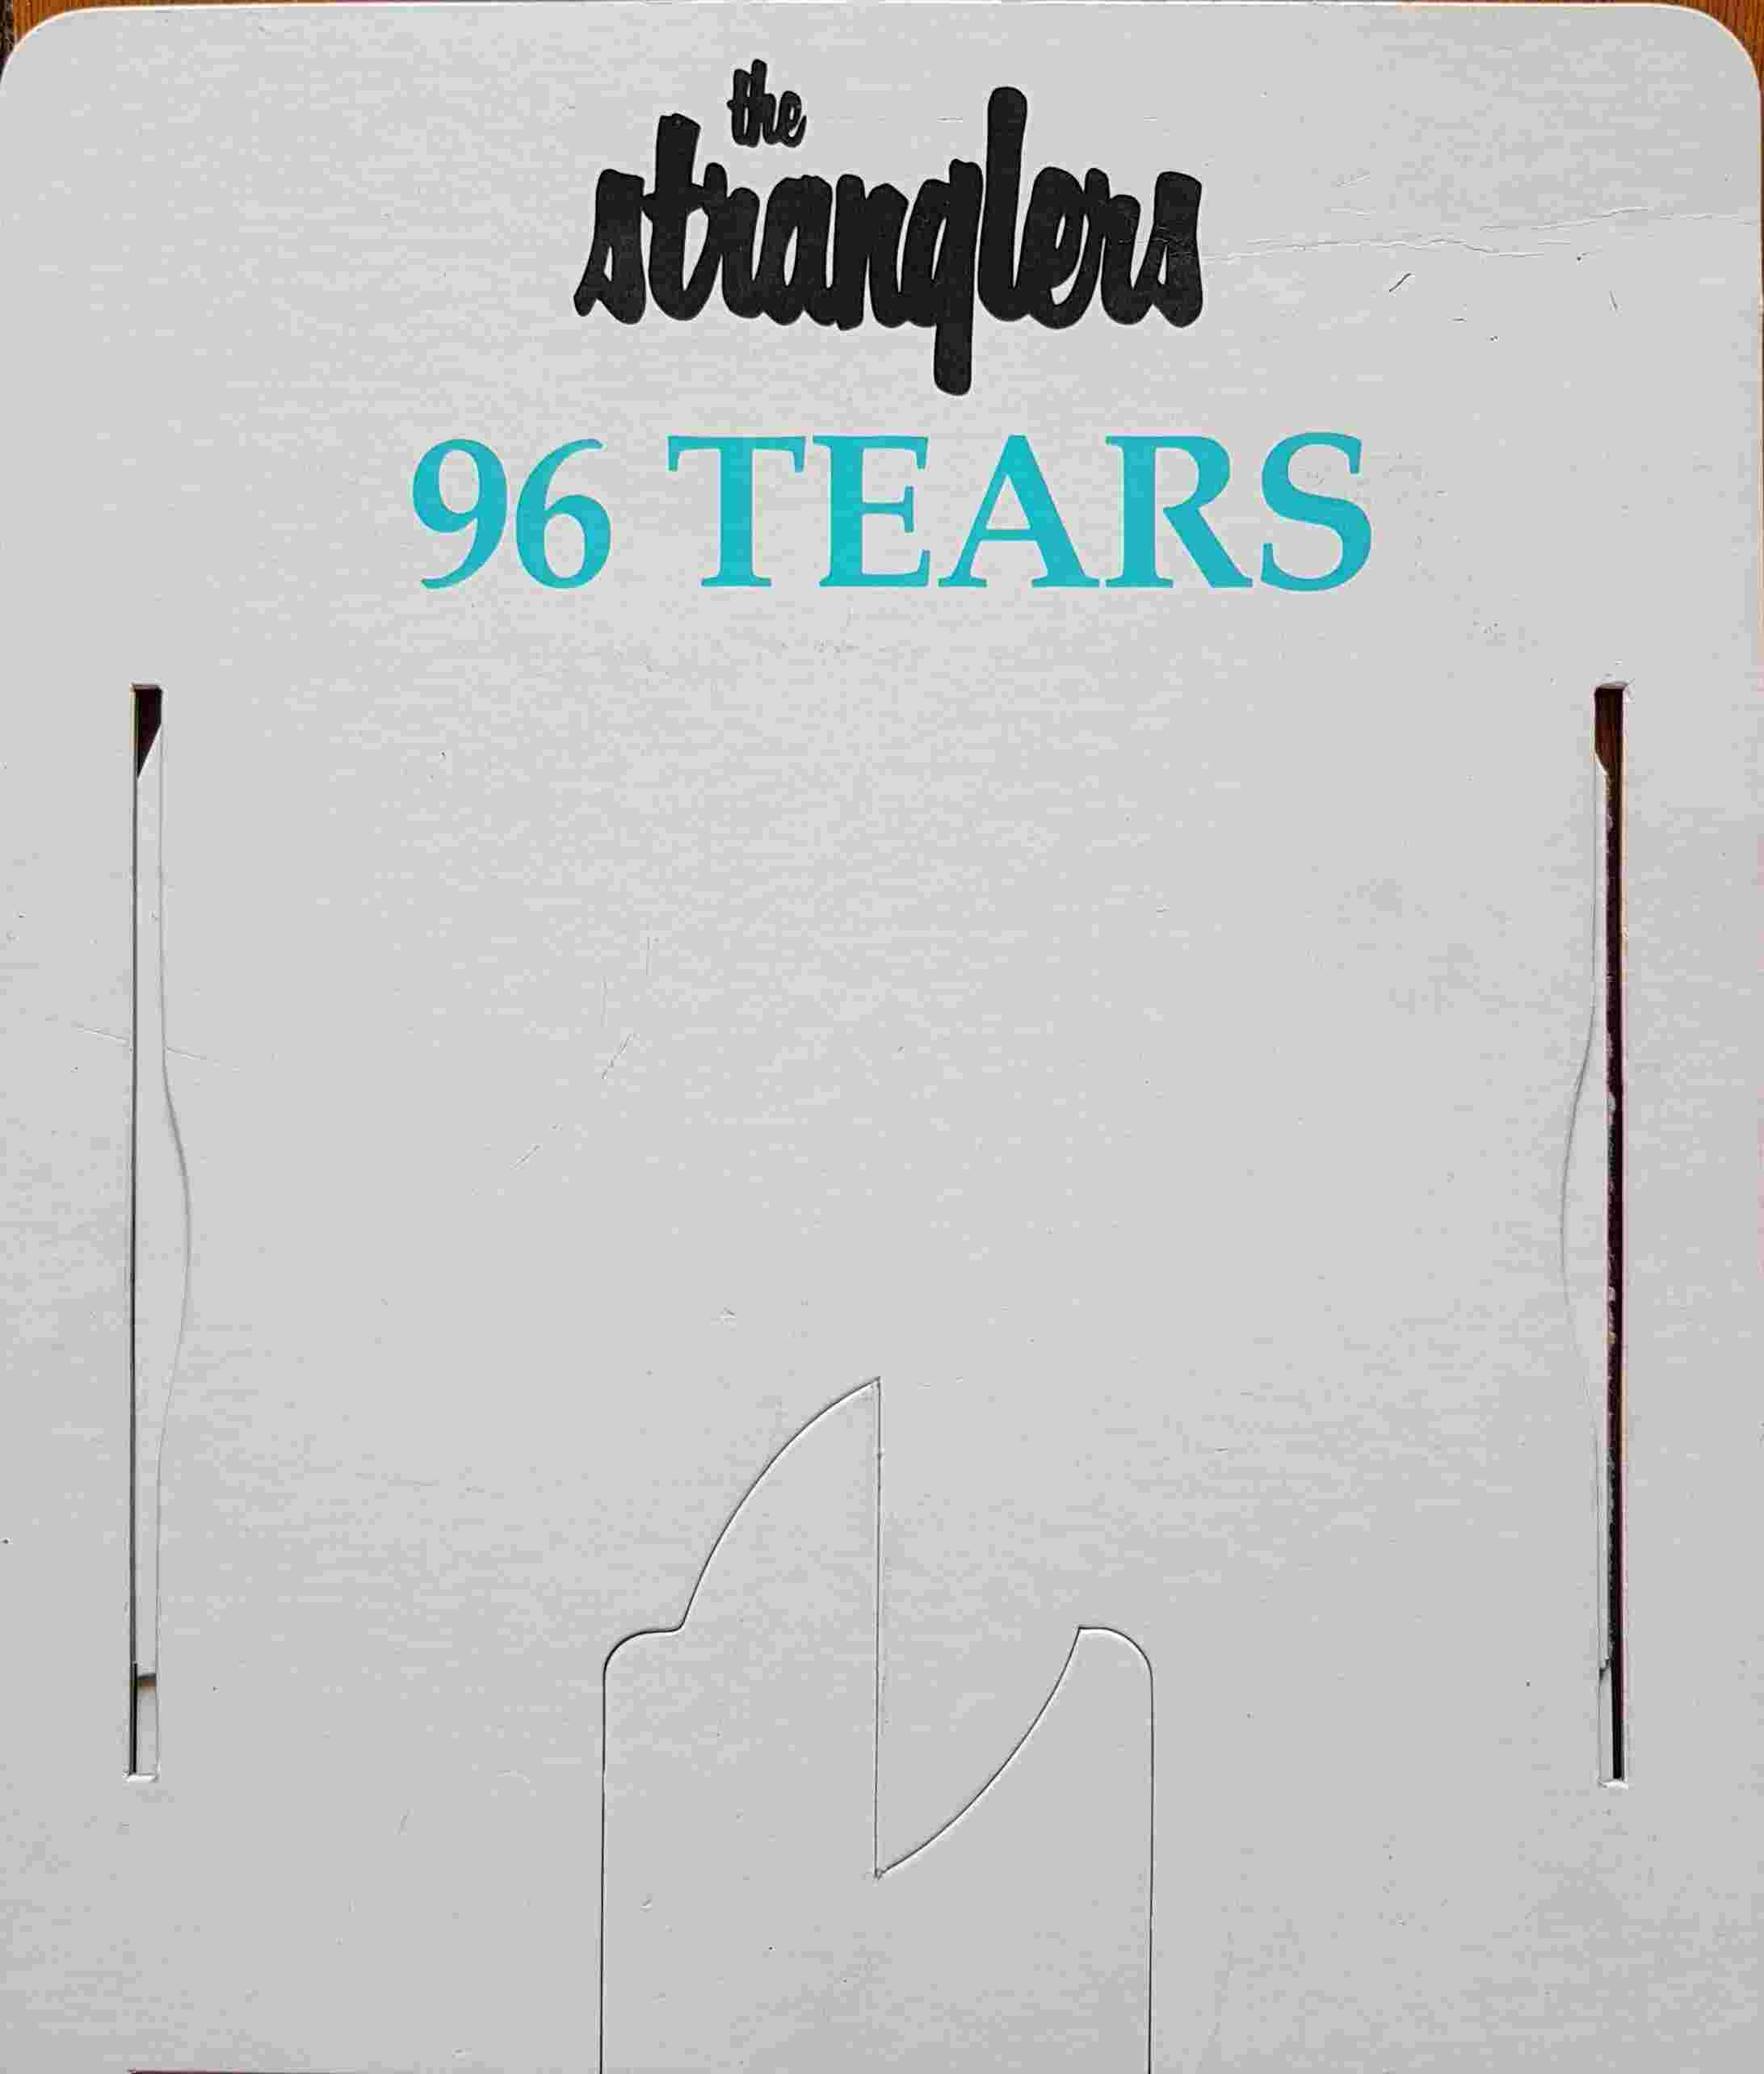 Picture of 96T_SH 96 tears - Single shop display by artist The Stranglers from The Stranglers anything_else